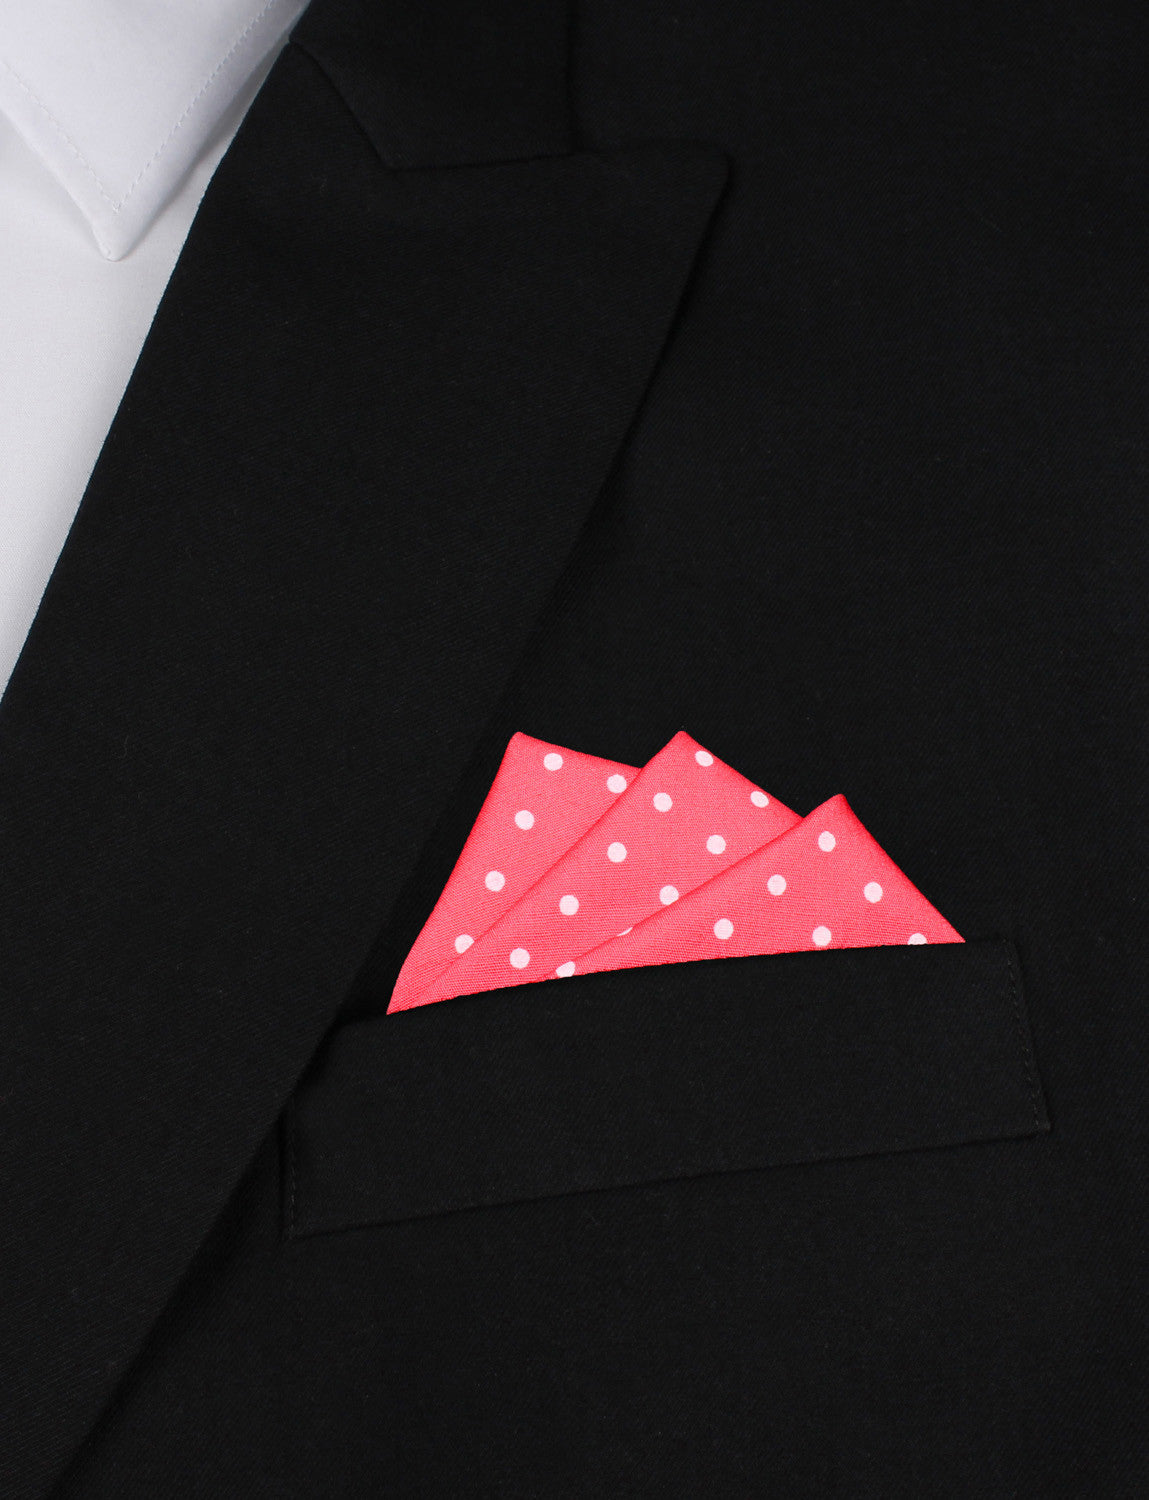 Bright Pink with White Polka Dots Cotton Oxygen Three Point Pocket Square Fold